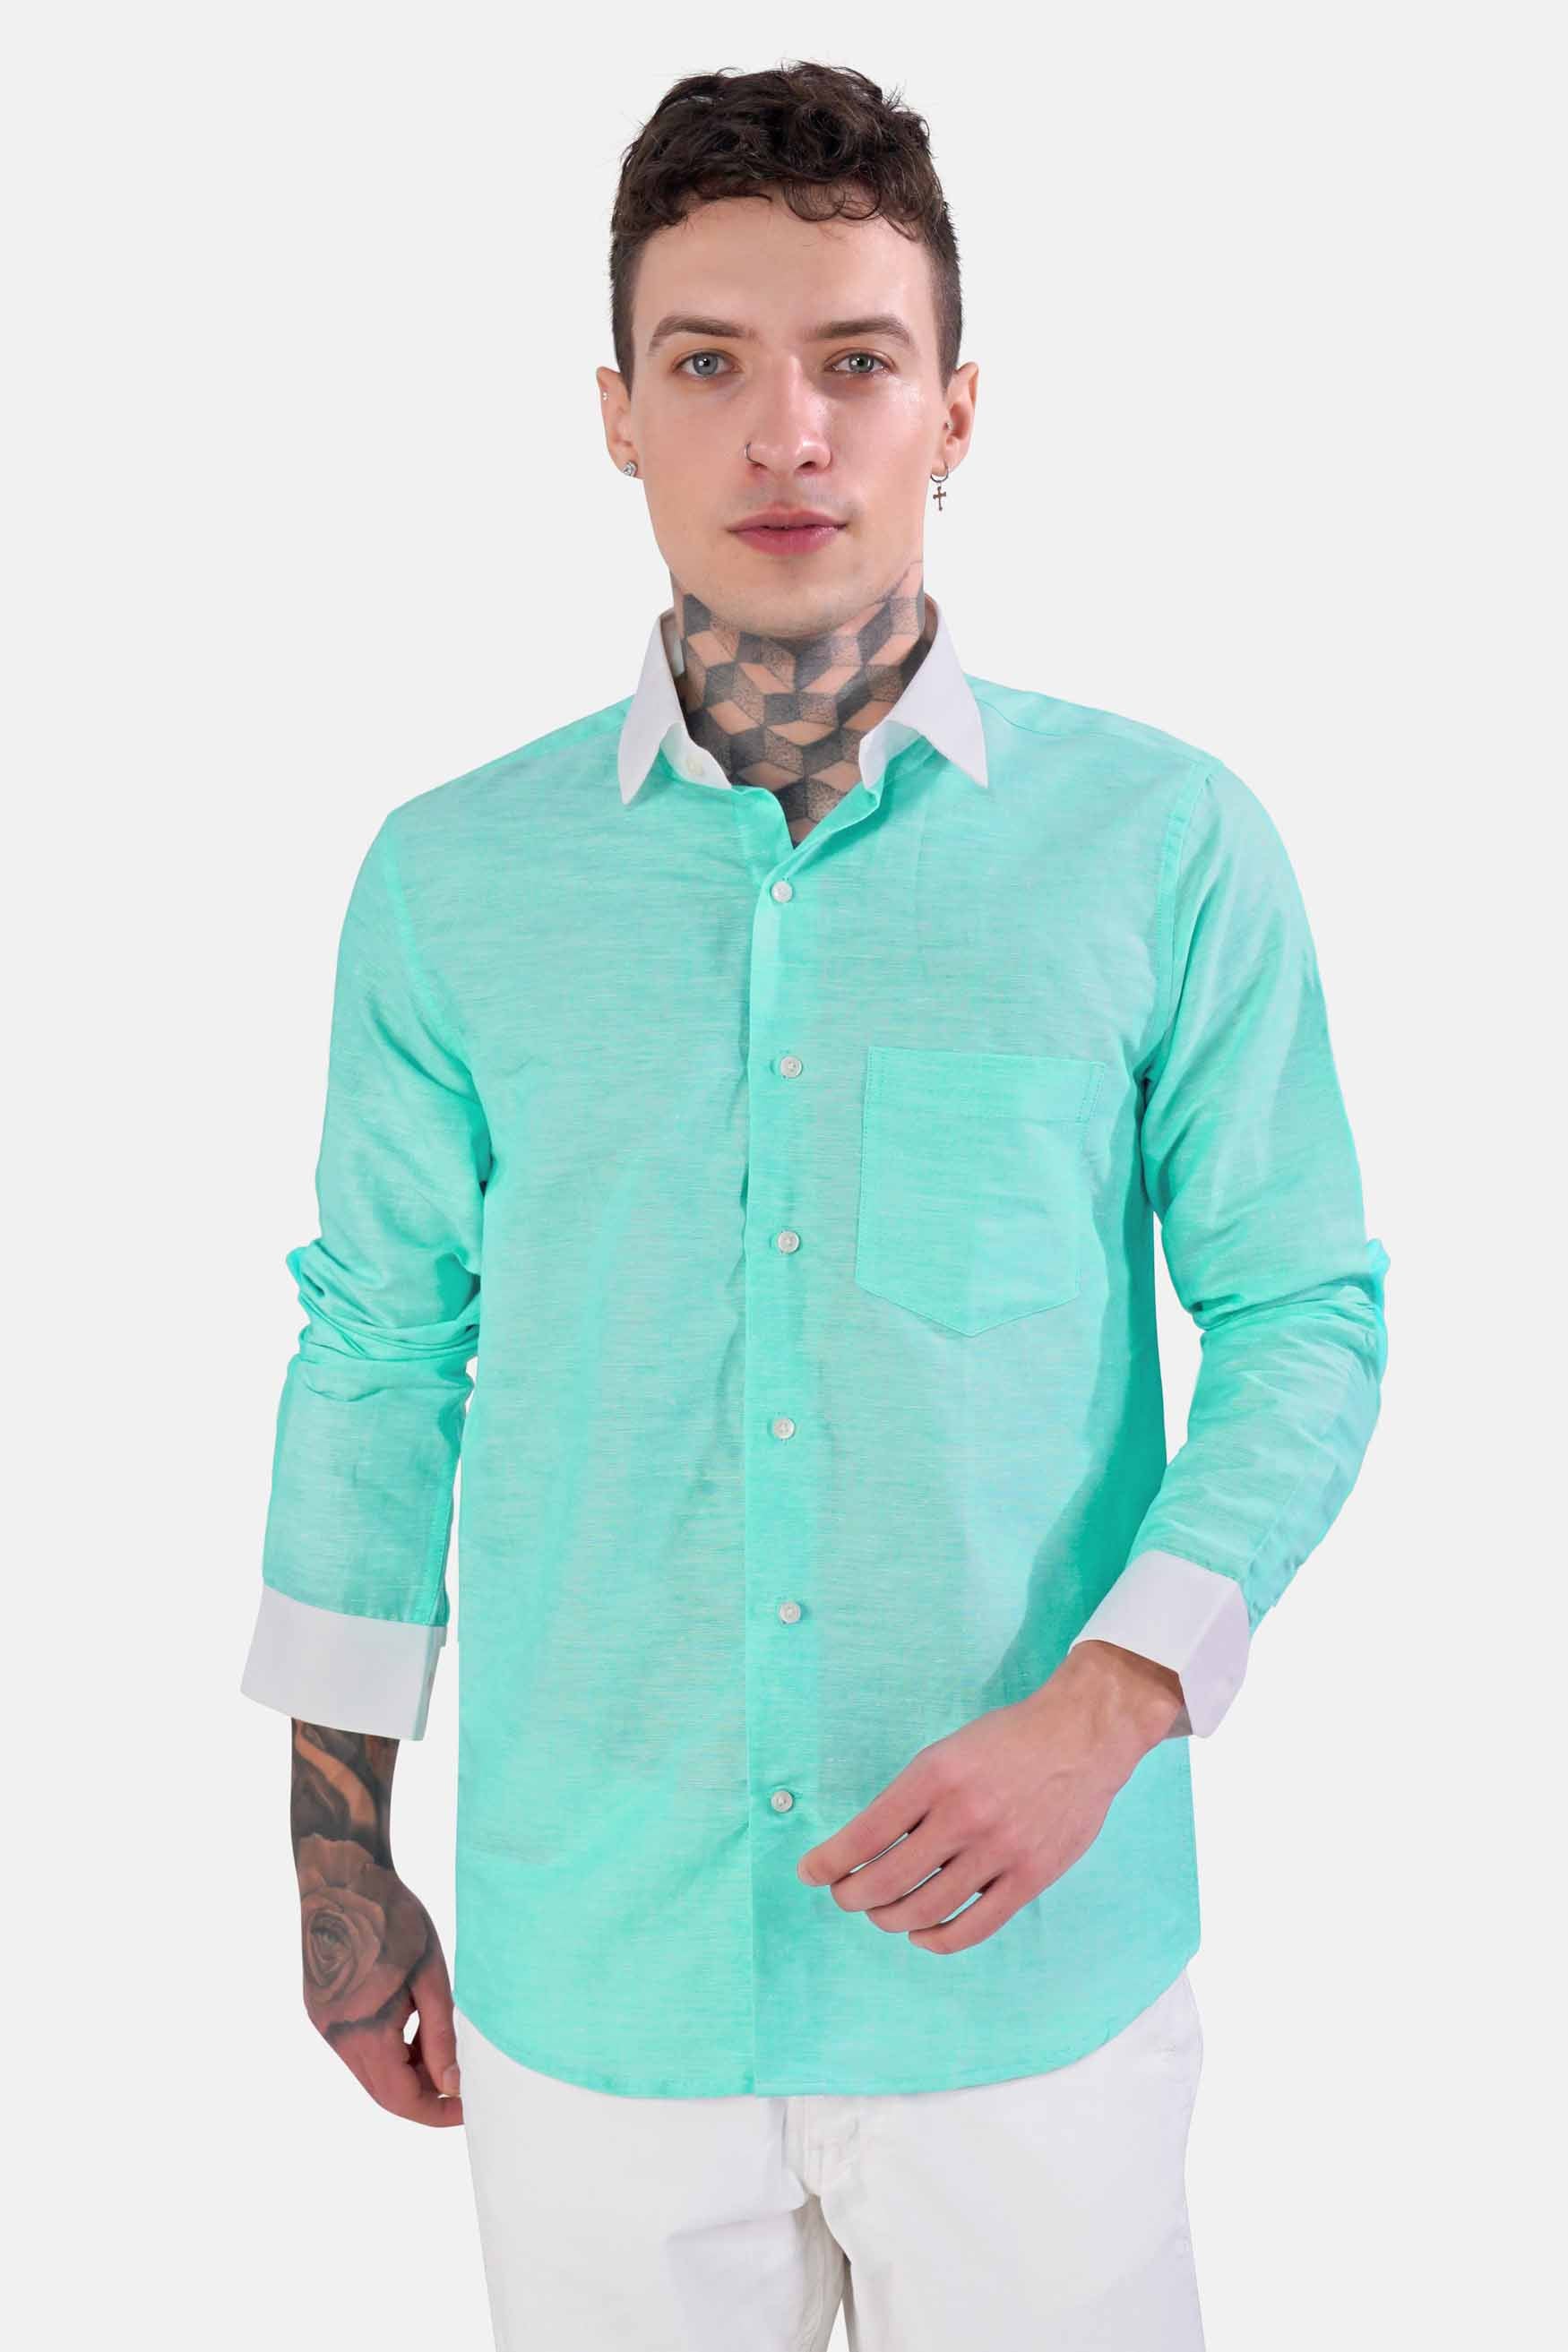 Turquoise Blue with White Cuffs and Collar Luxurious Linen Shirt